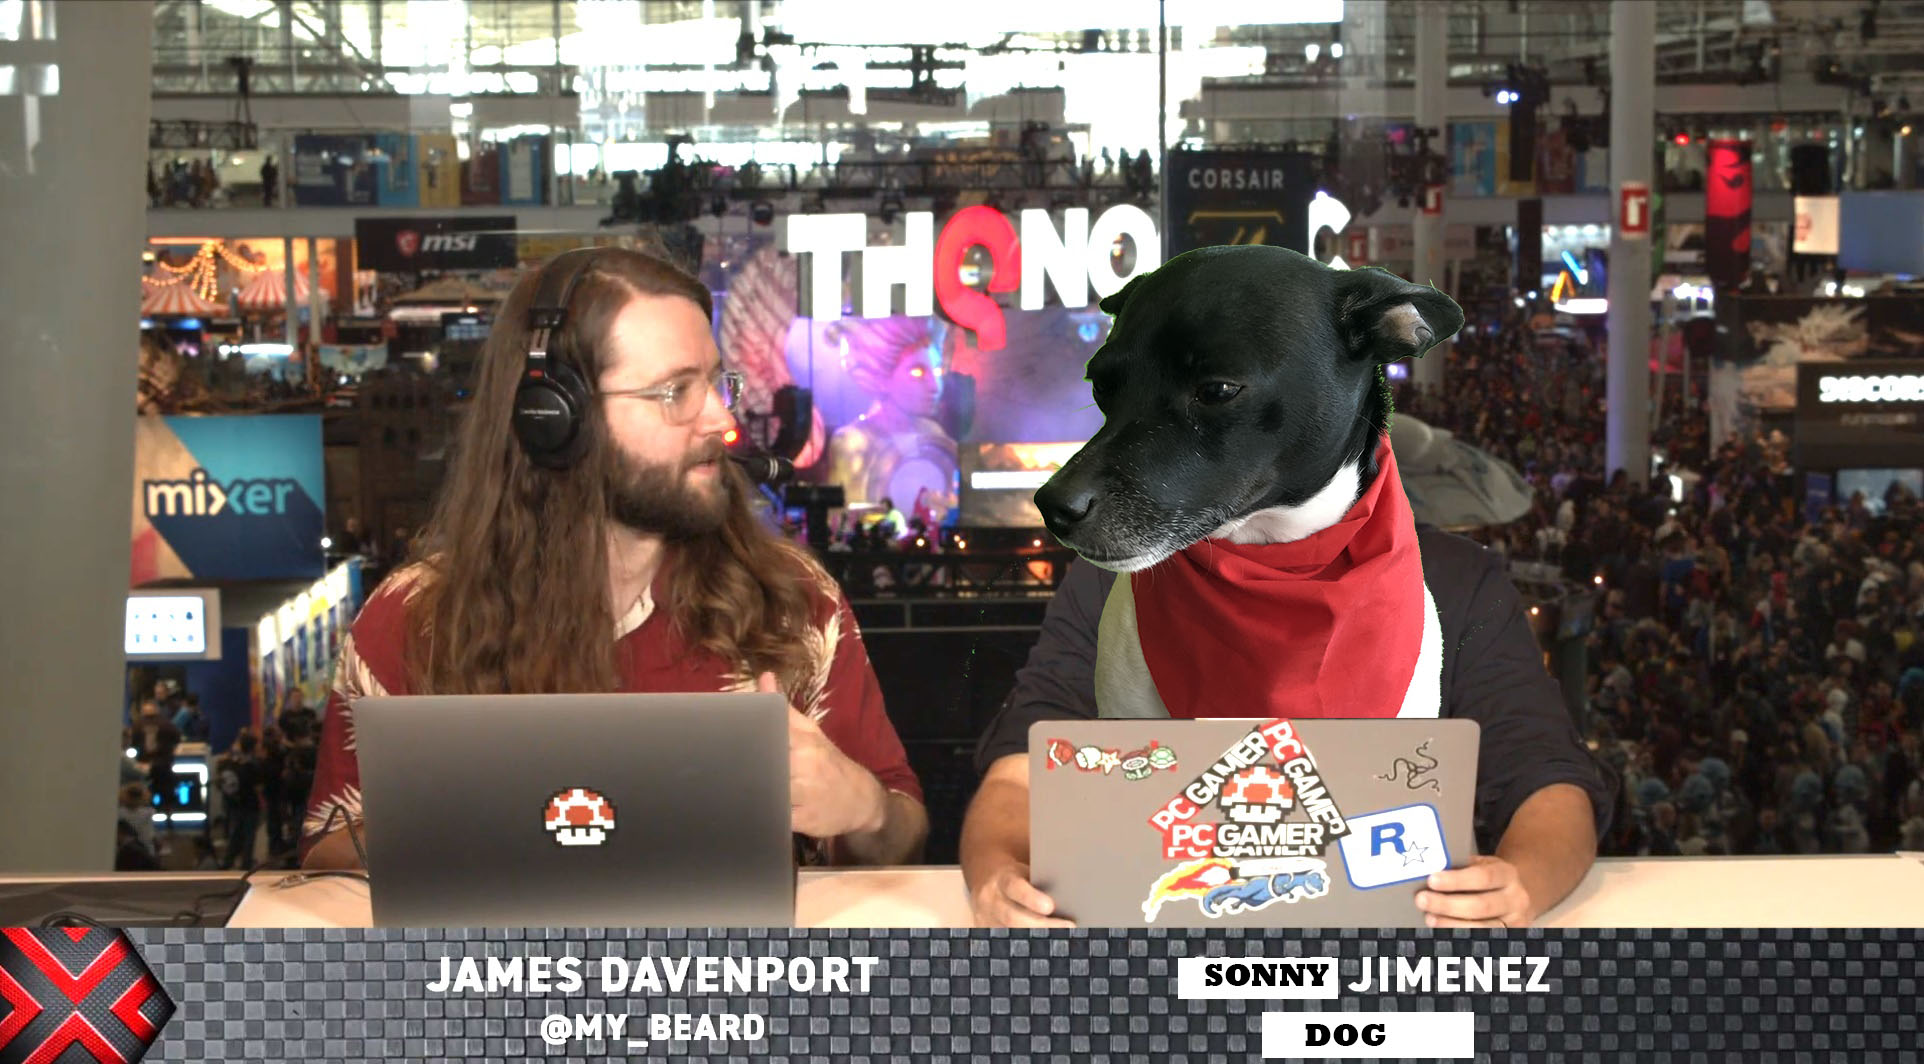 Sonny co-hosting the Pax East Livestream with James